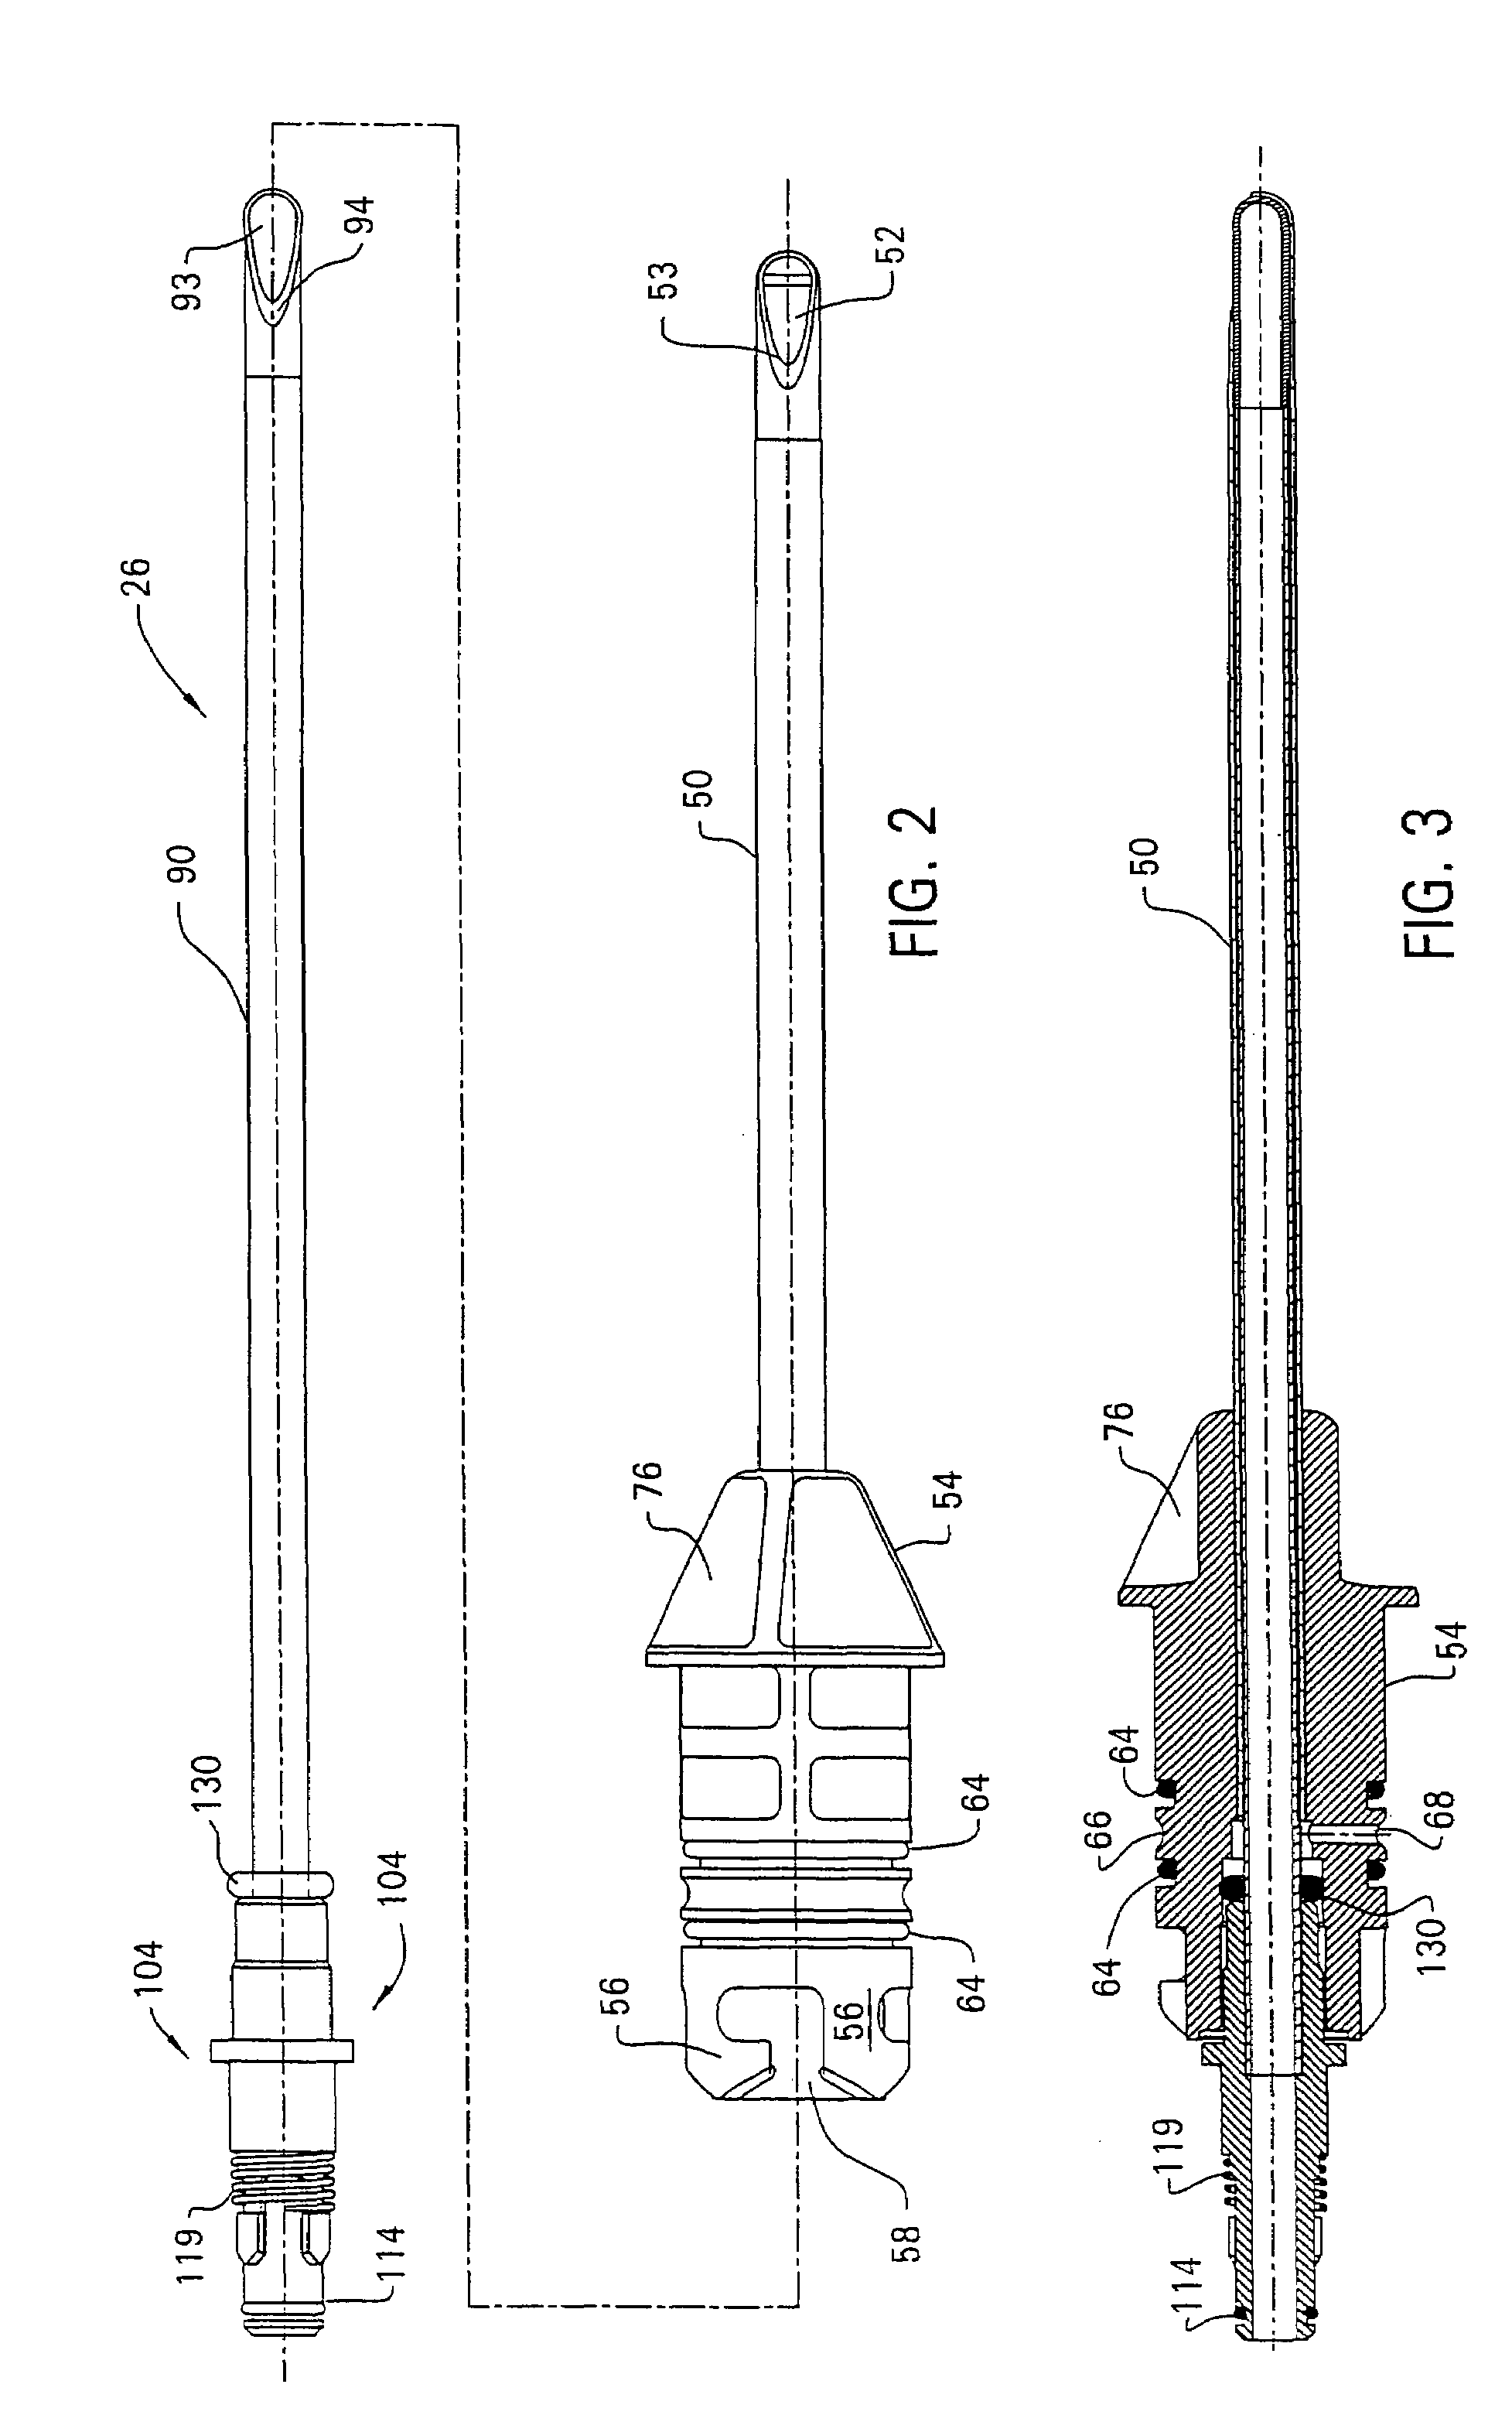 System and method for performing irrigated nose and throat surgery